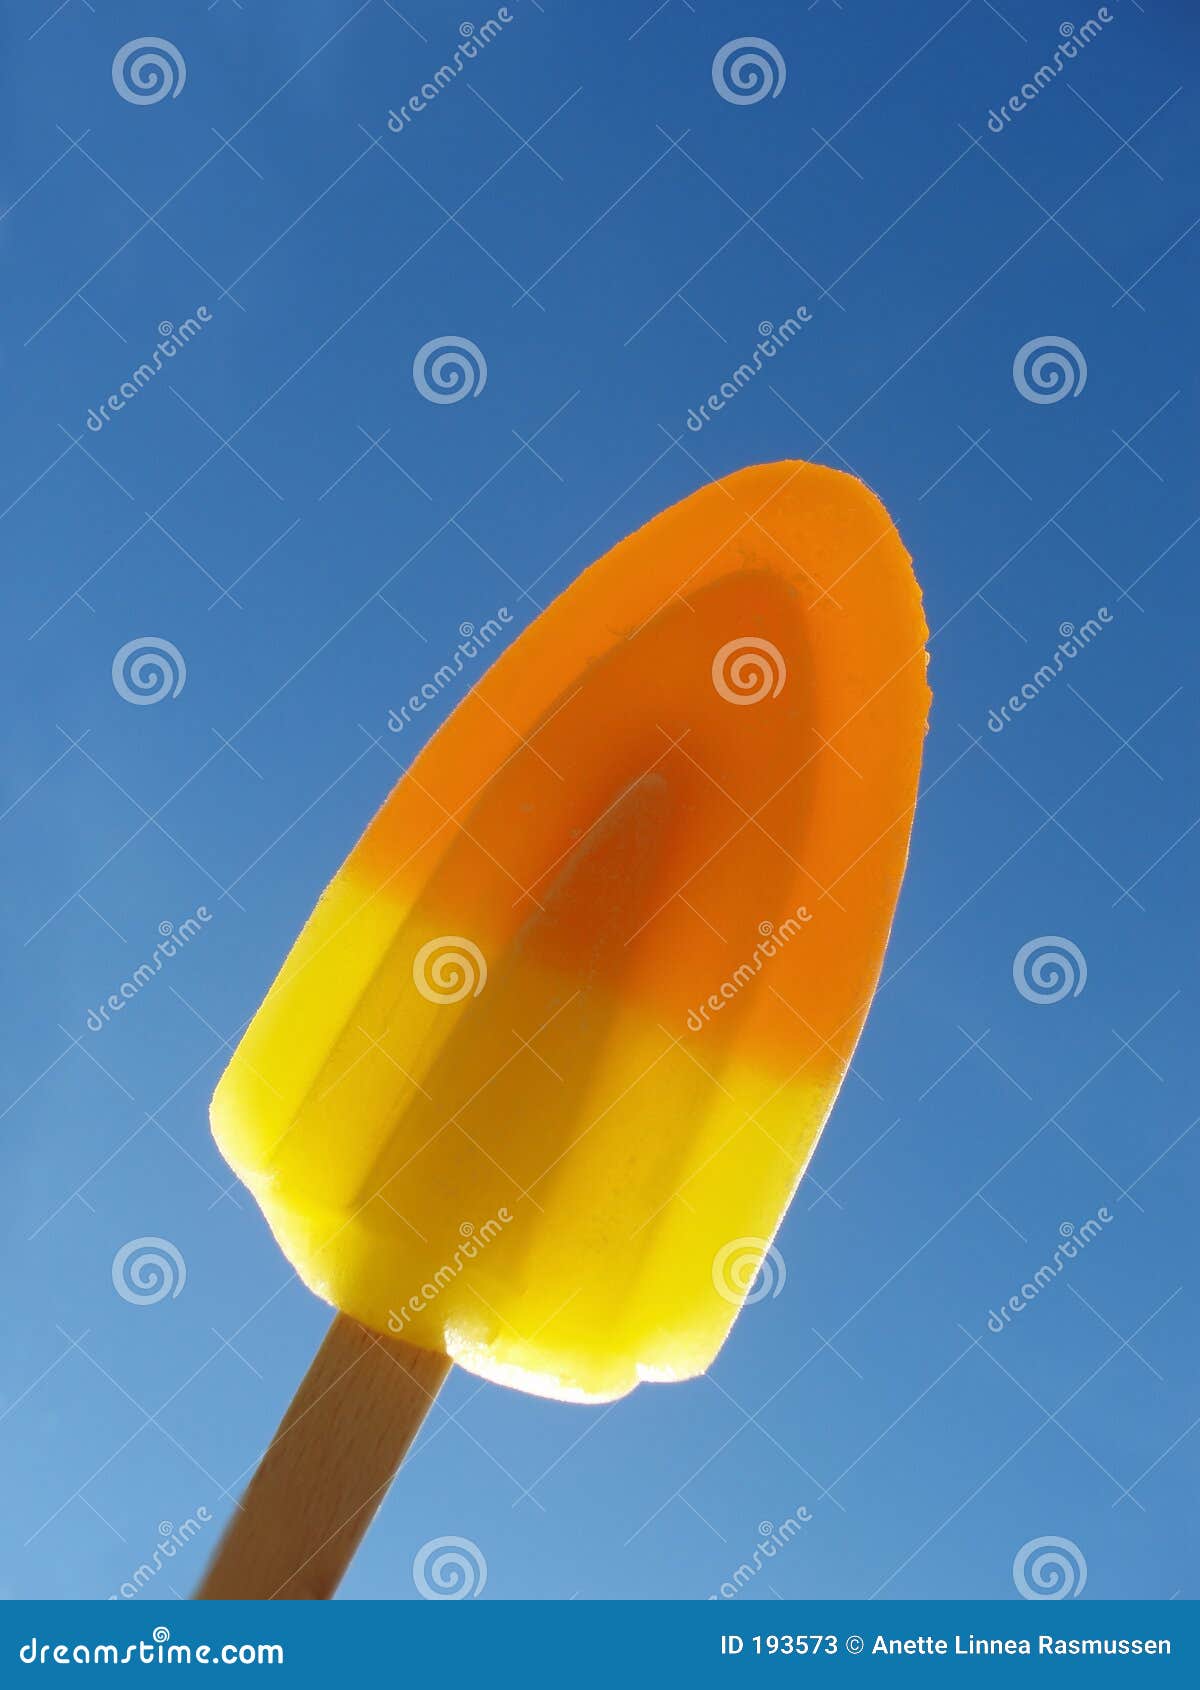 orange and yellow ice lolly